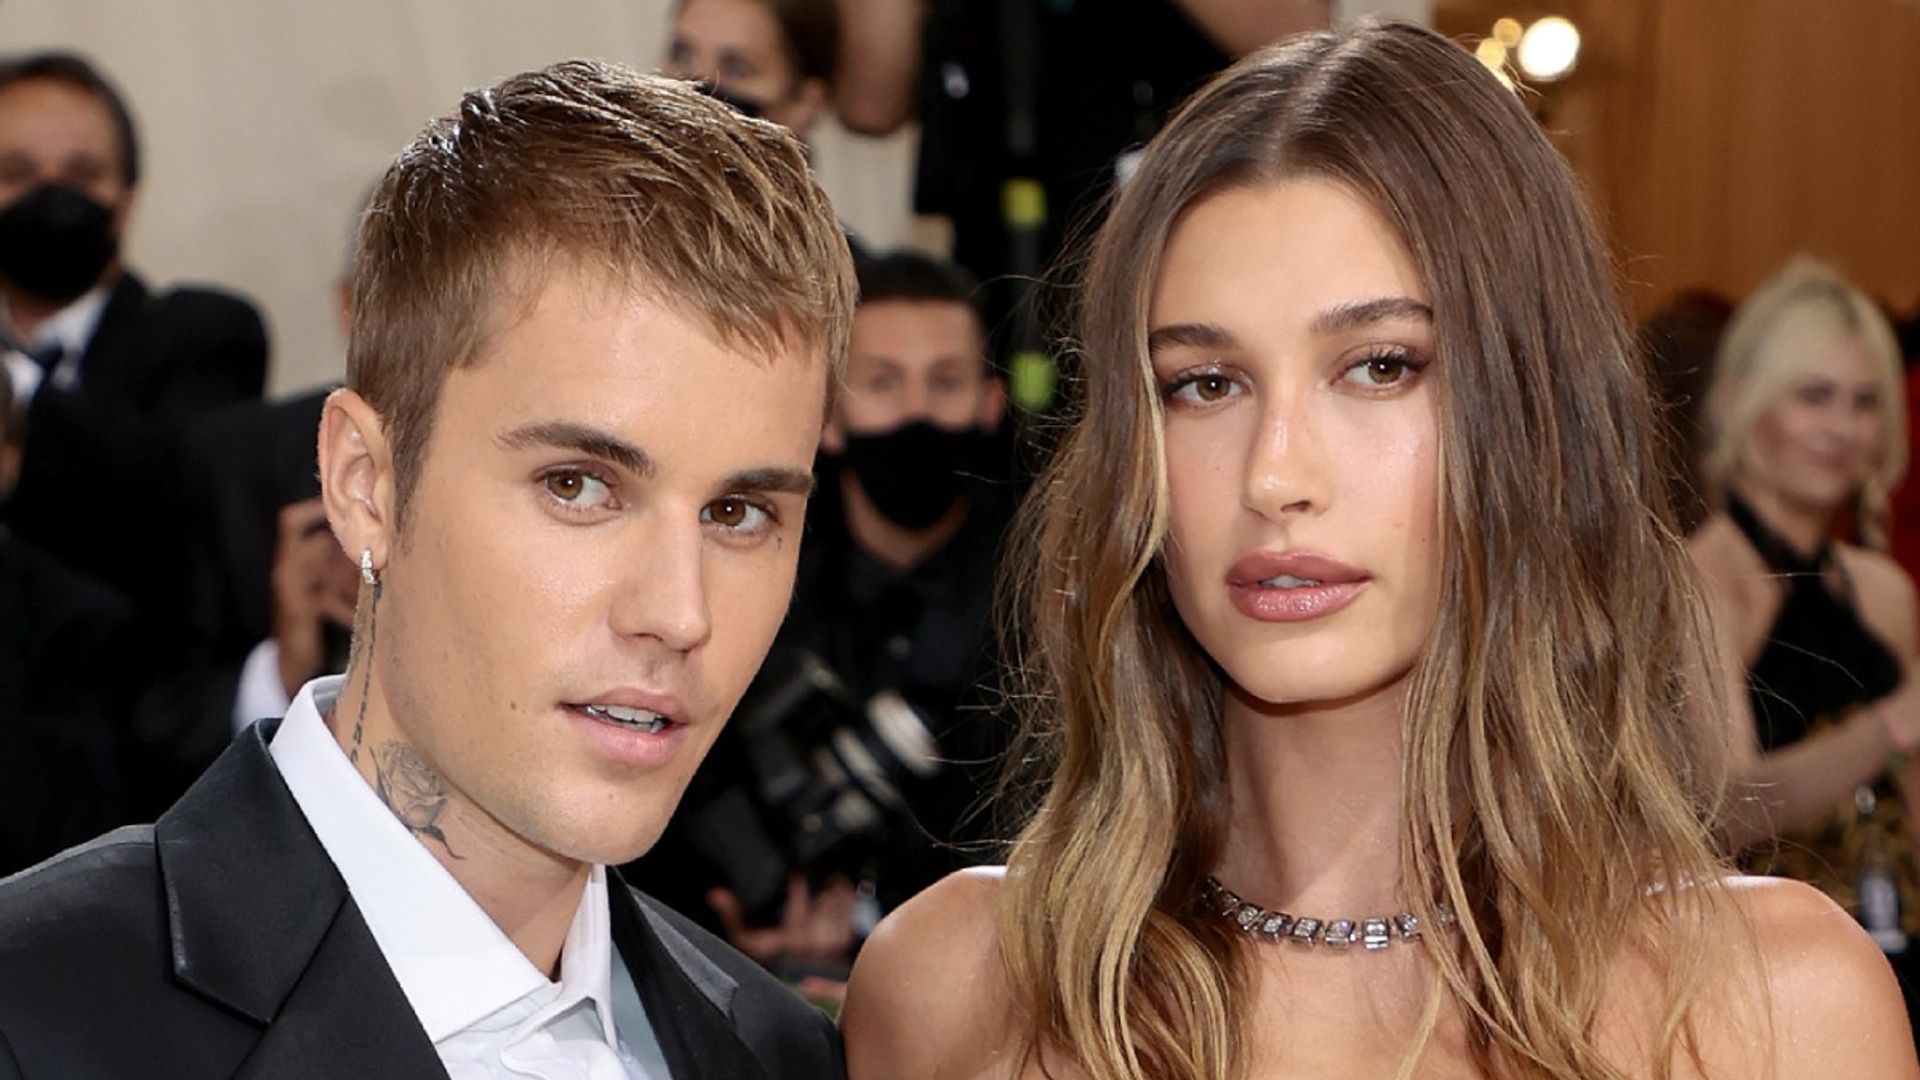 Justin Bieber's latest wedding photos with wife Hailey leave fans confused